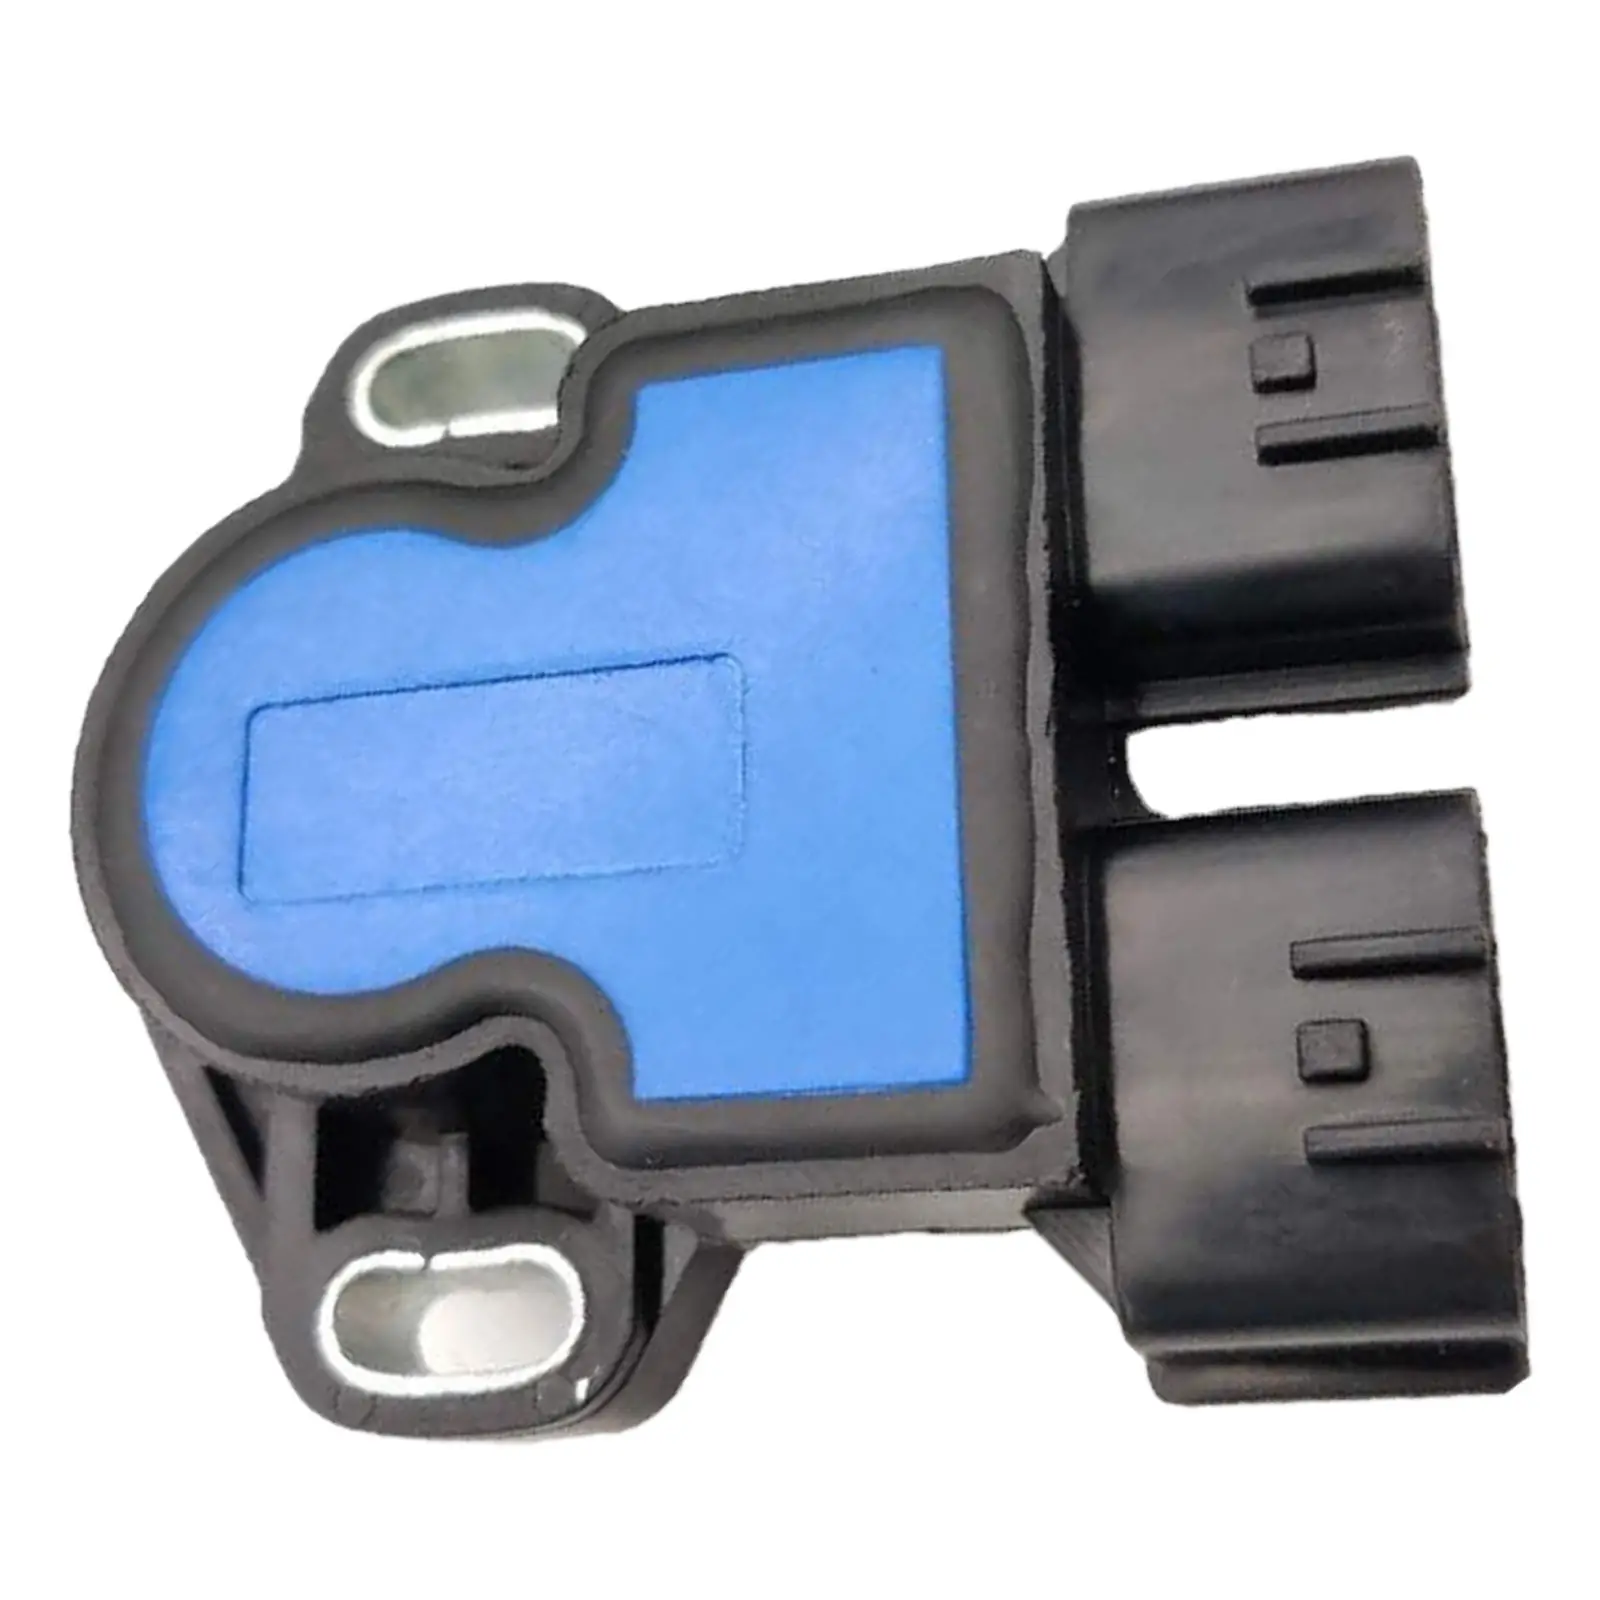 Throttle Position Sensor Fits for Nissan Xterra Frontier Engine SERA486-07 8971631640 Replacement Accessories